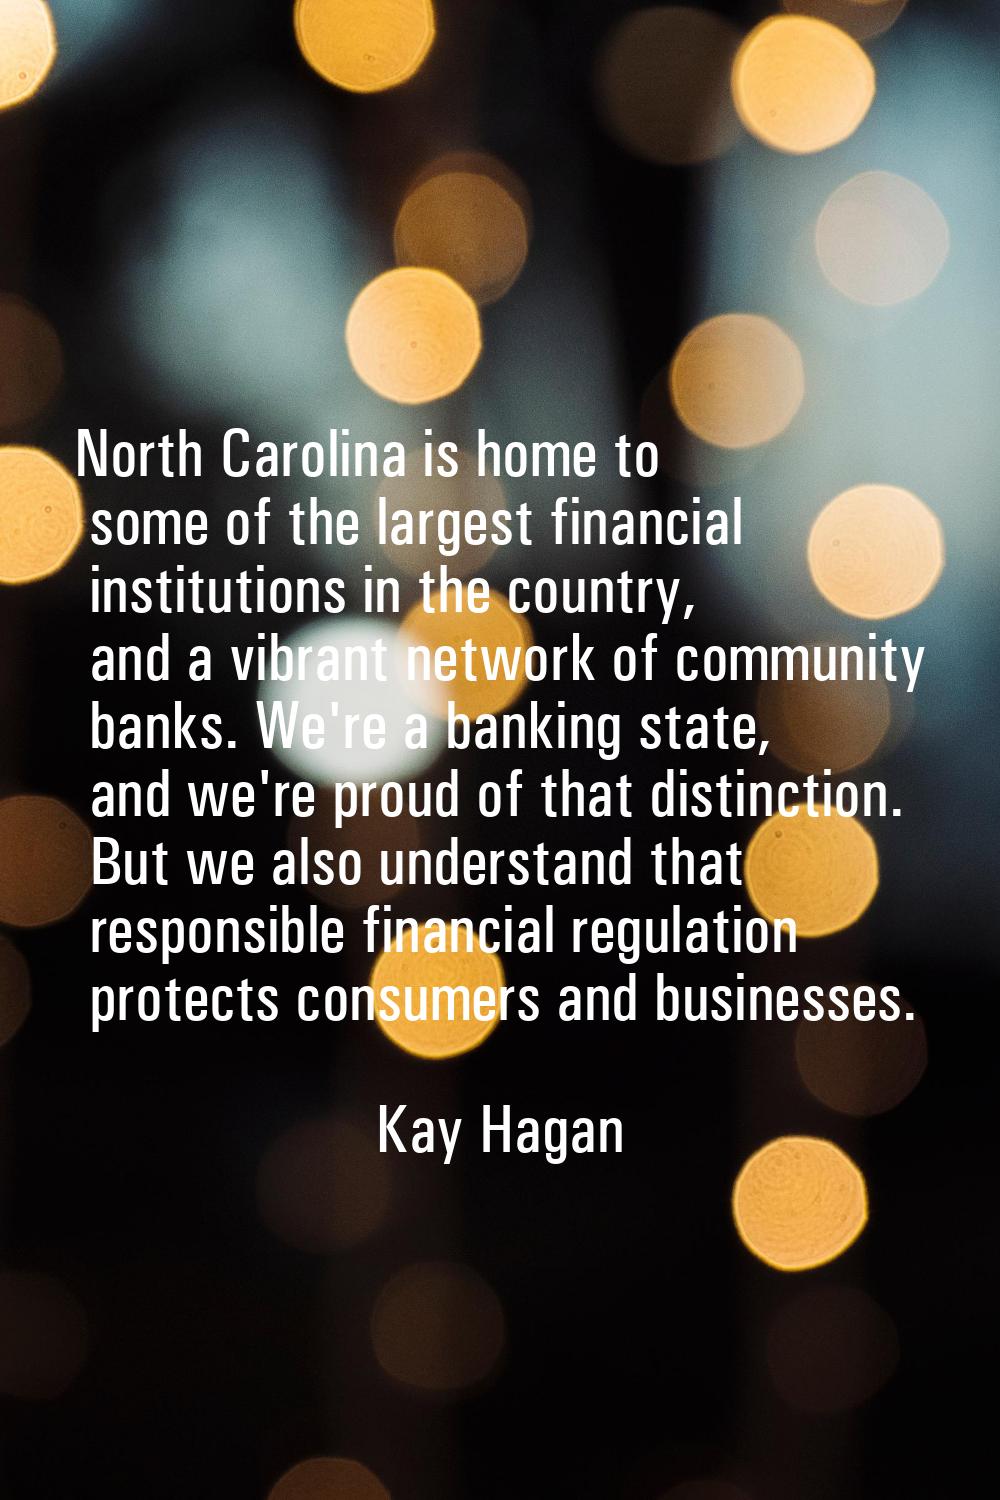 North Carolina is home to some of the largest financial institutions in the country, and a vibrant 